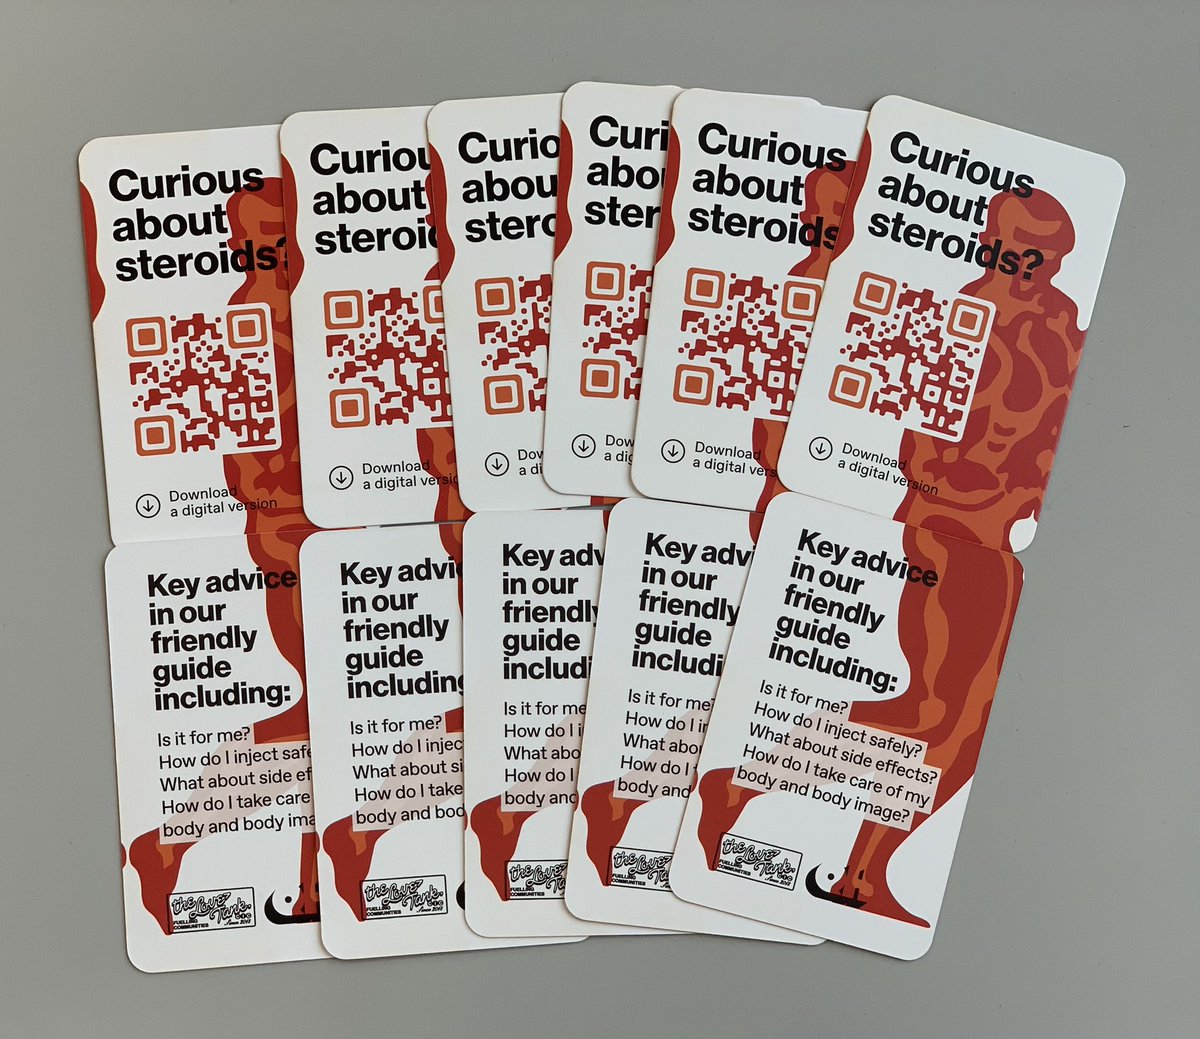 Are you an organisation, venue, clinic, gym or club? Could you stock copies of our new credit-card sized card promoting our online steroid guide? DM us a mailing address and we’ll send some. The online guide is here - queerhealth.info/steriods